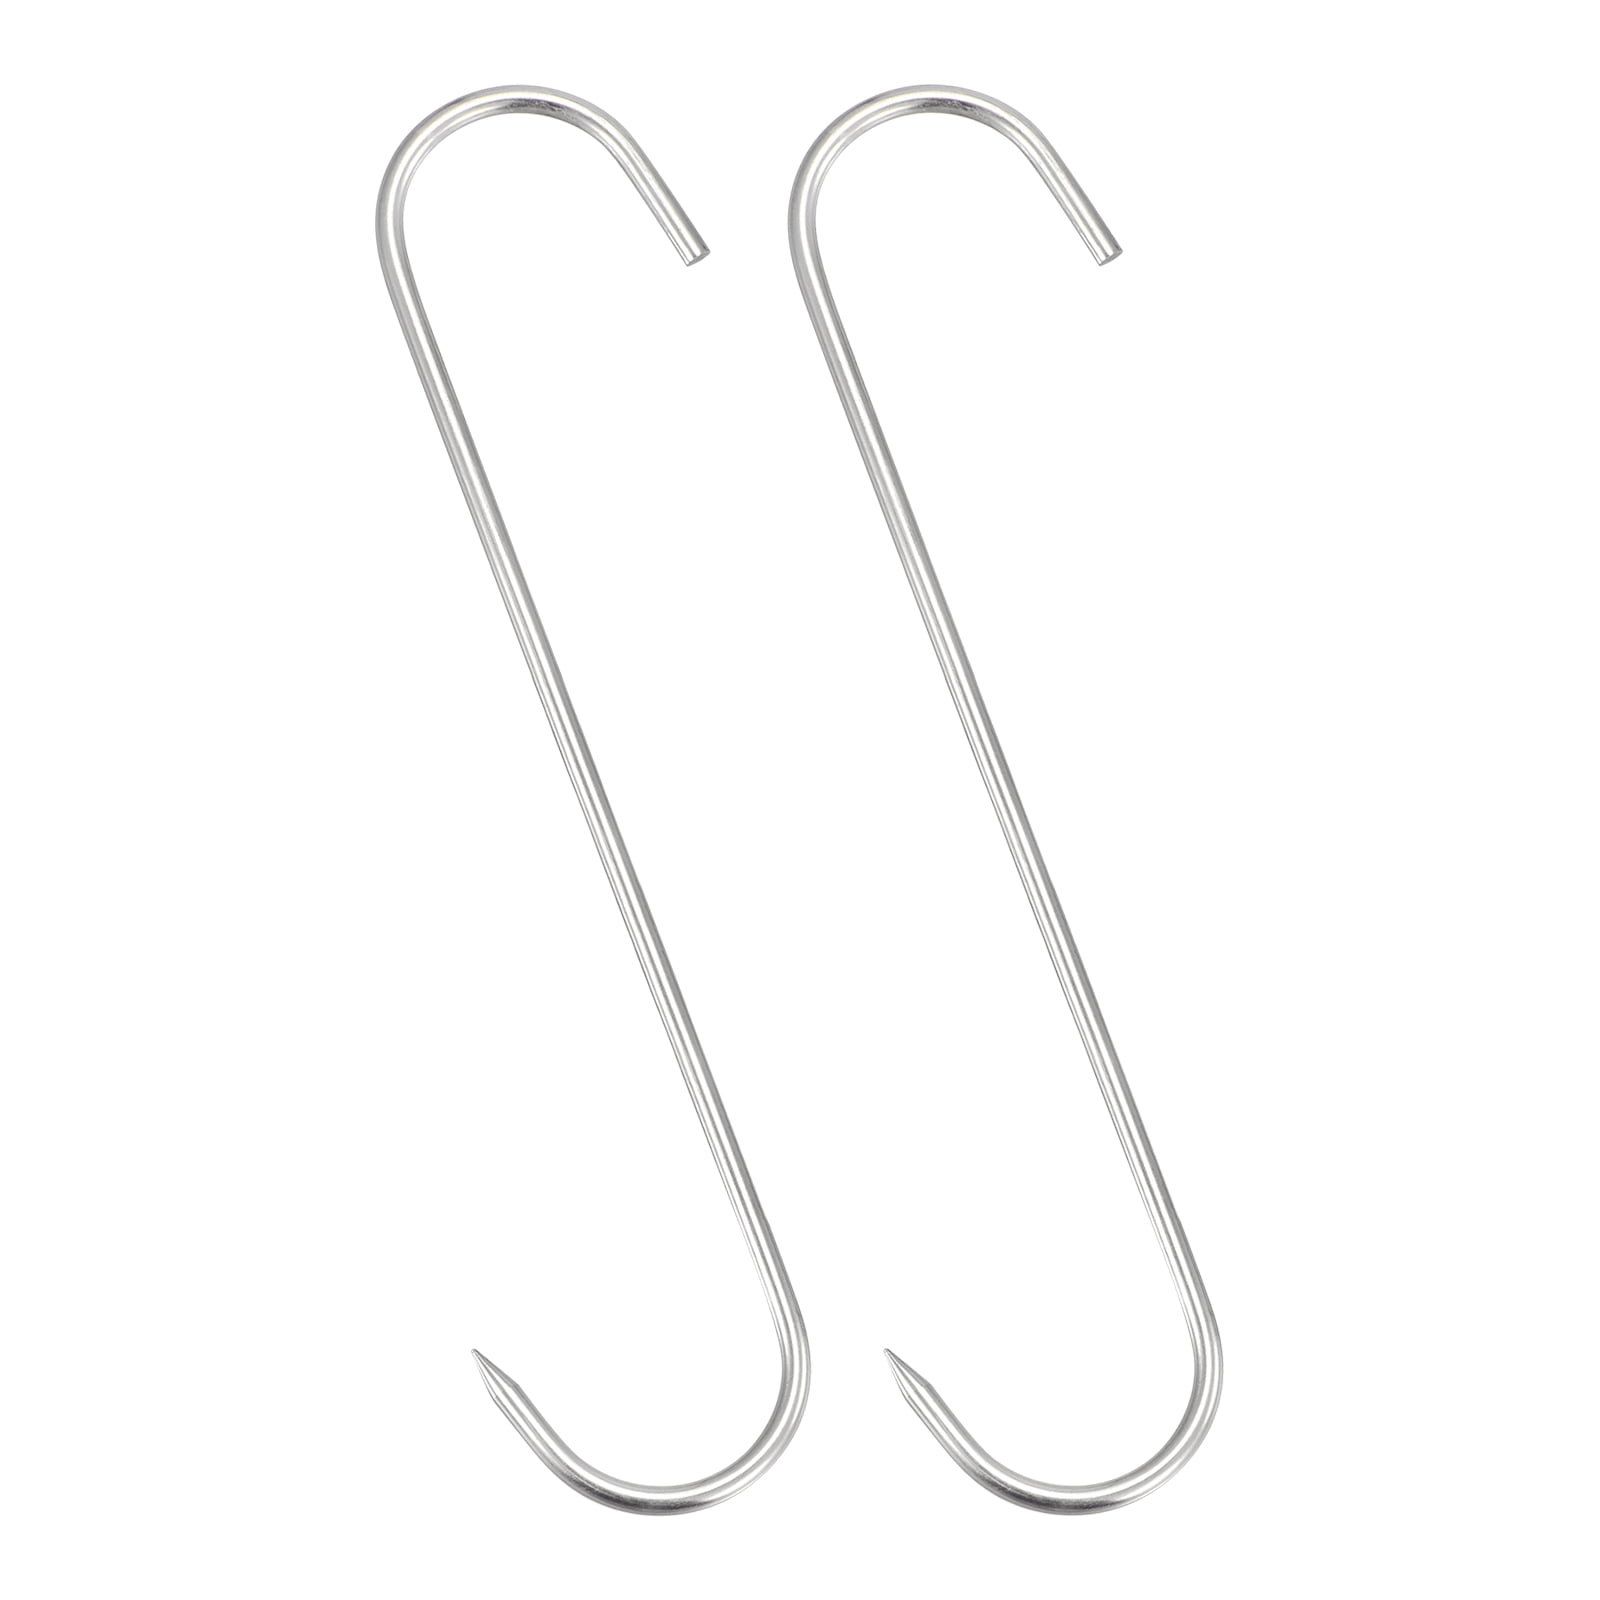 Uxcell 8.86 Meat Hooks, 0.2 Thick Stainless Steel S-Hook, Meat Processing  Hanging 2Pack 